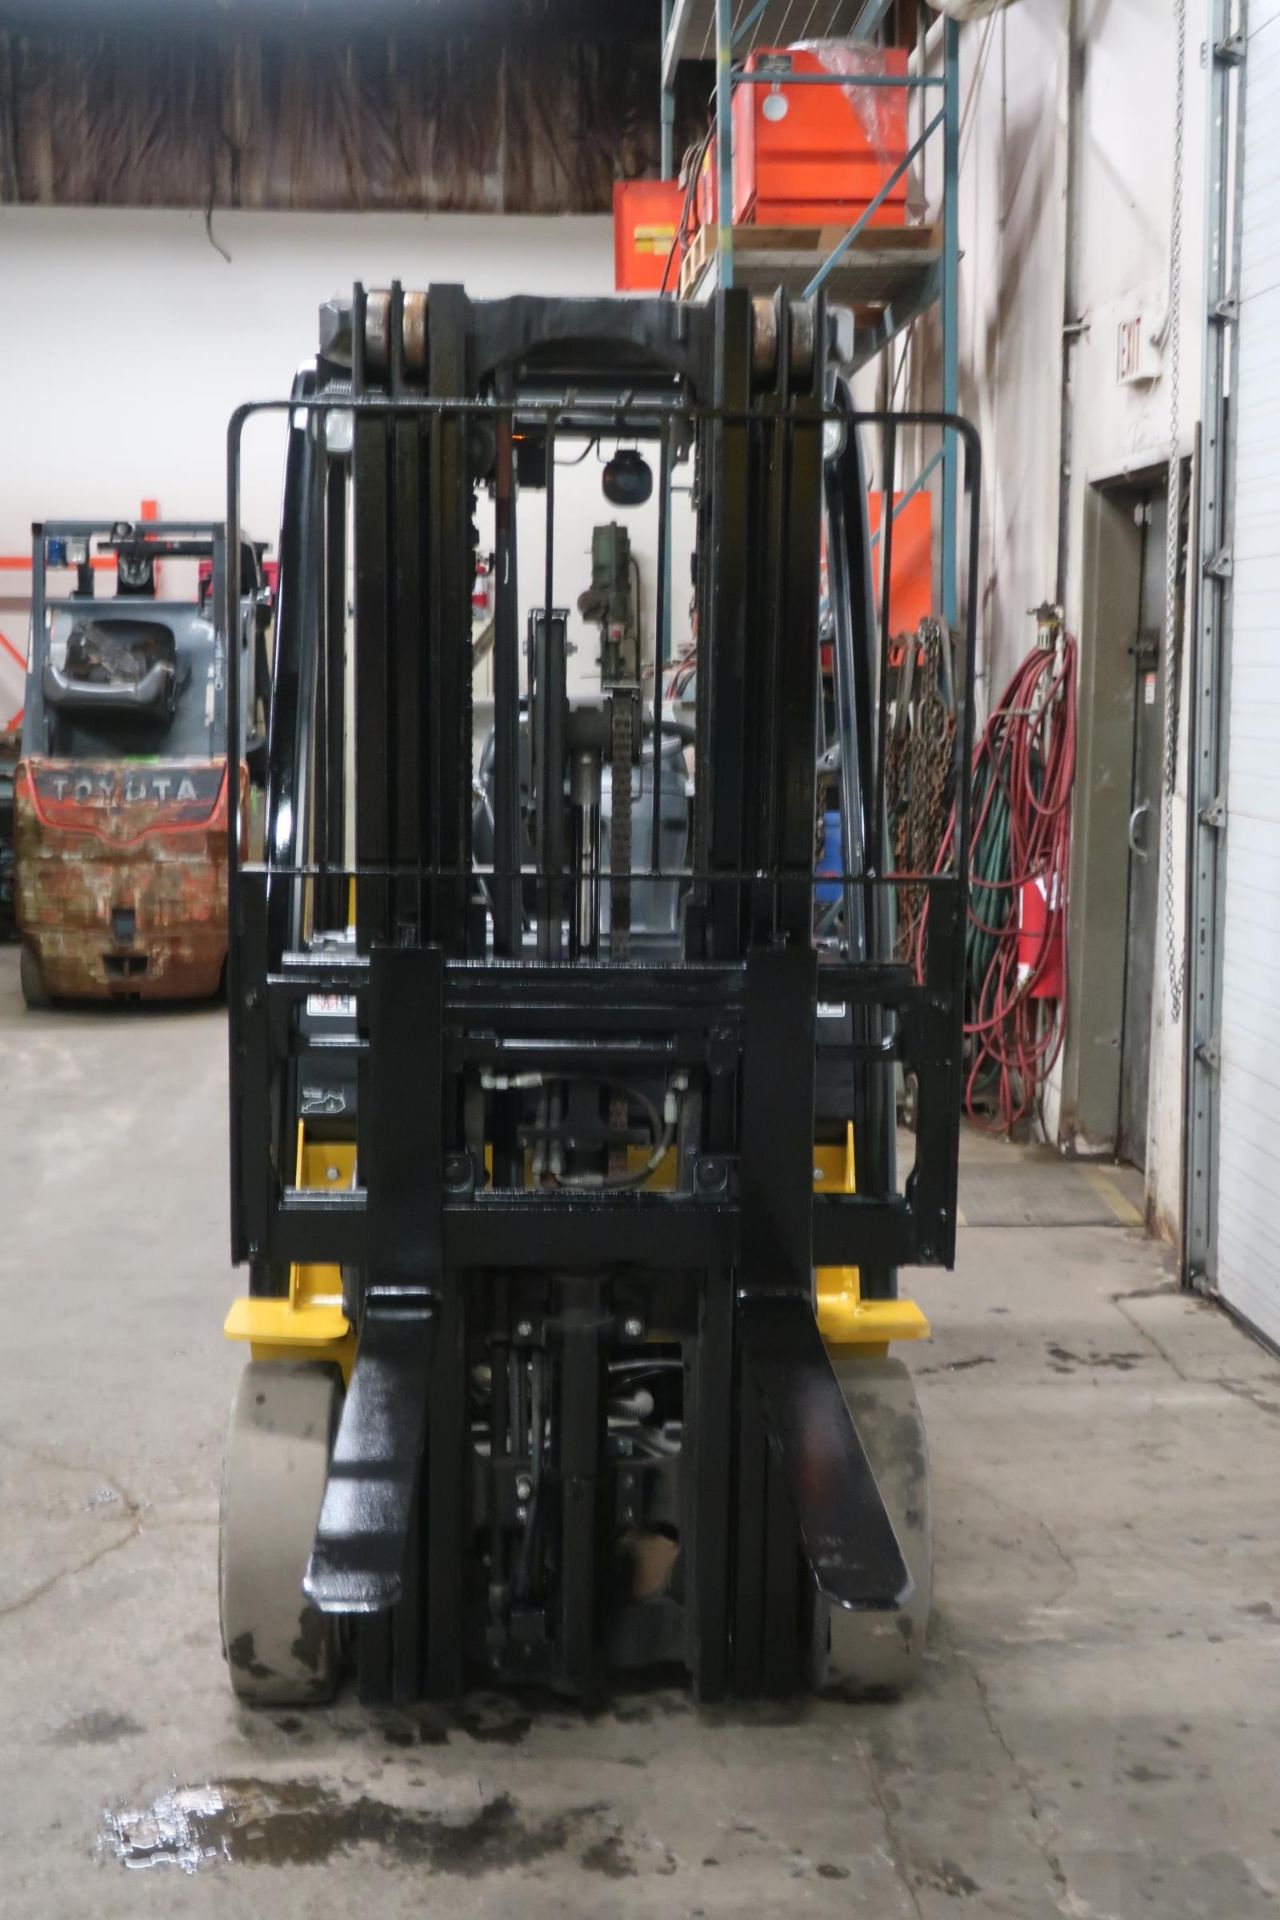 FREE CUSTOMS - 2013 Yale 5000lbs Capacity Forklift with 3-stage mast - LPG (propane) with - Image 2 of 2